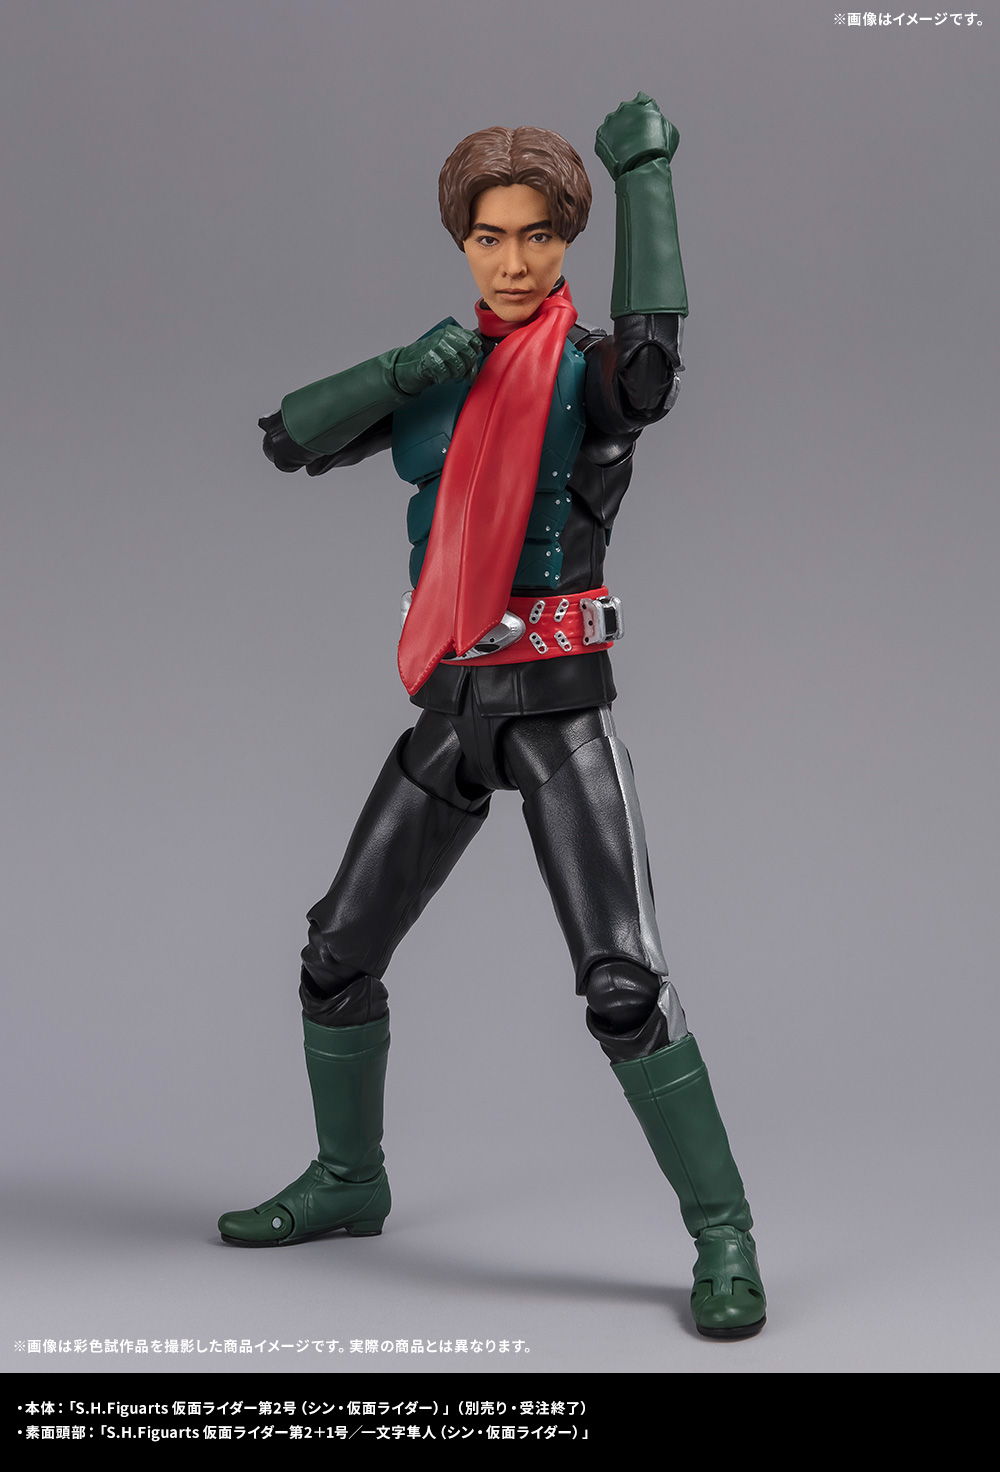 Introducing the pair united in the fight against Shocker, S.H.Figuarts MASKED RIDER NO. 2+1/ICHIMONJI HAYATO (SHIN MASKED RIDER), plus more series items!